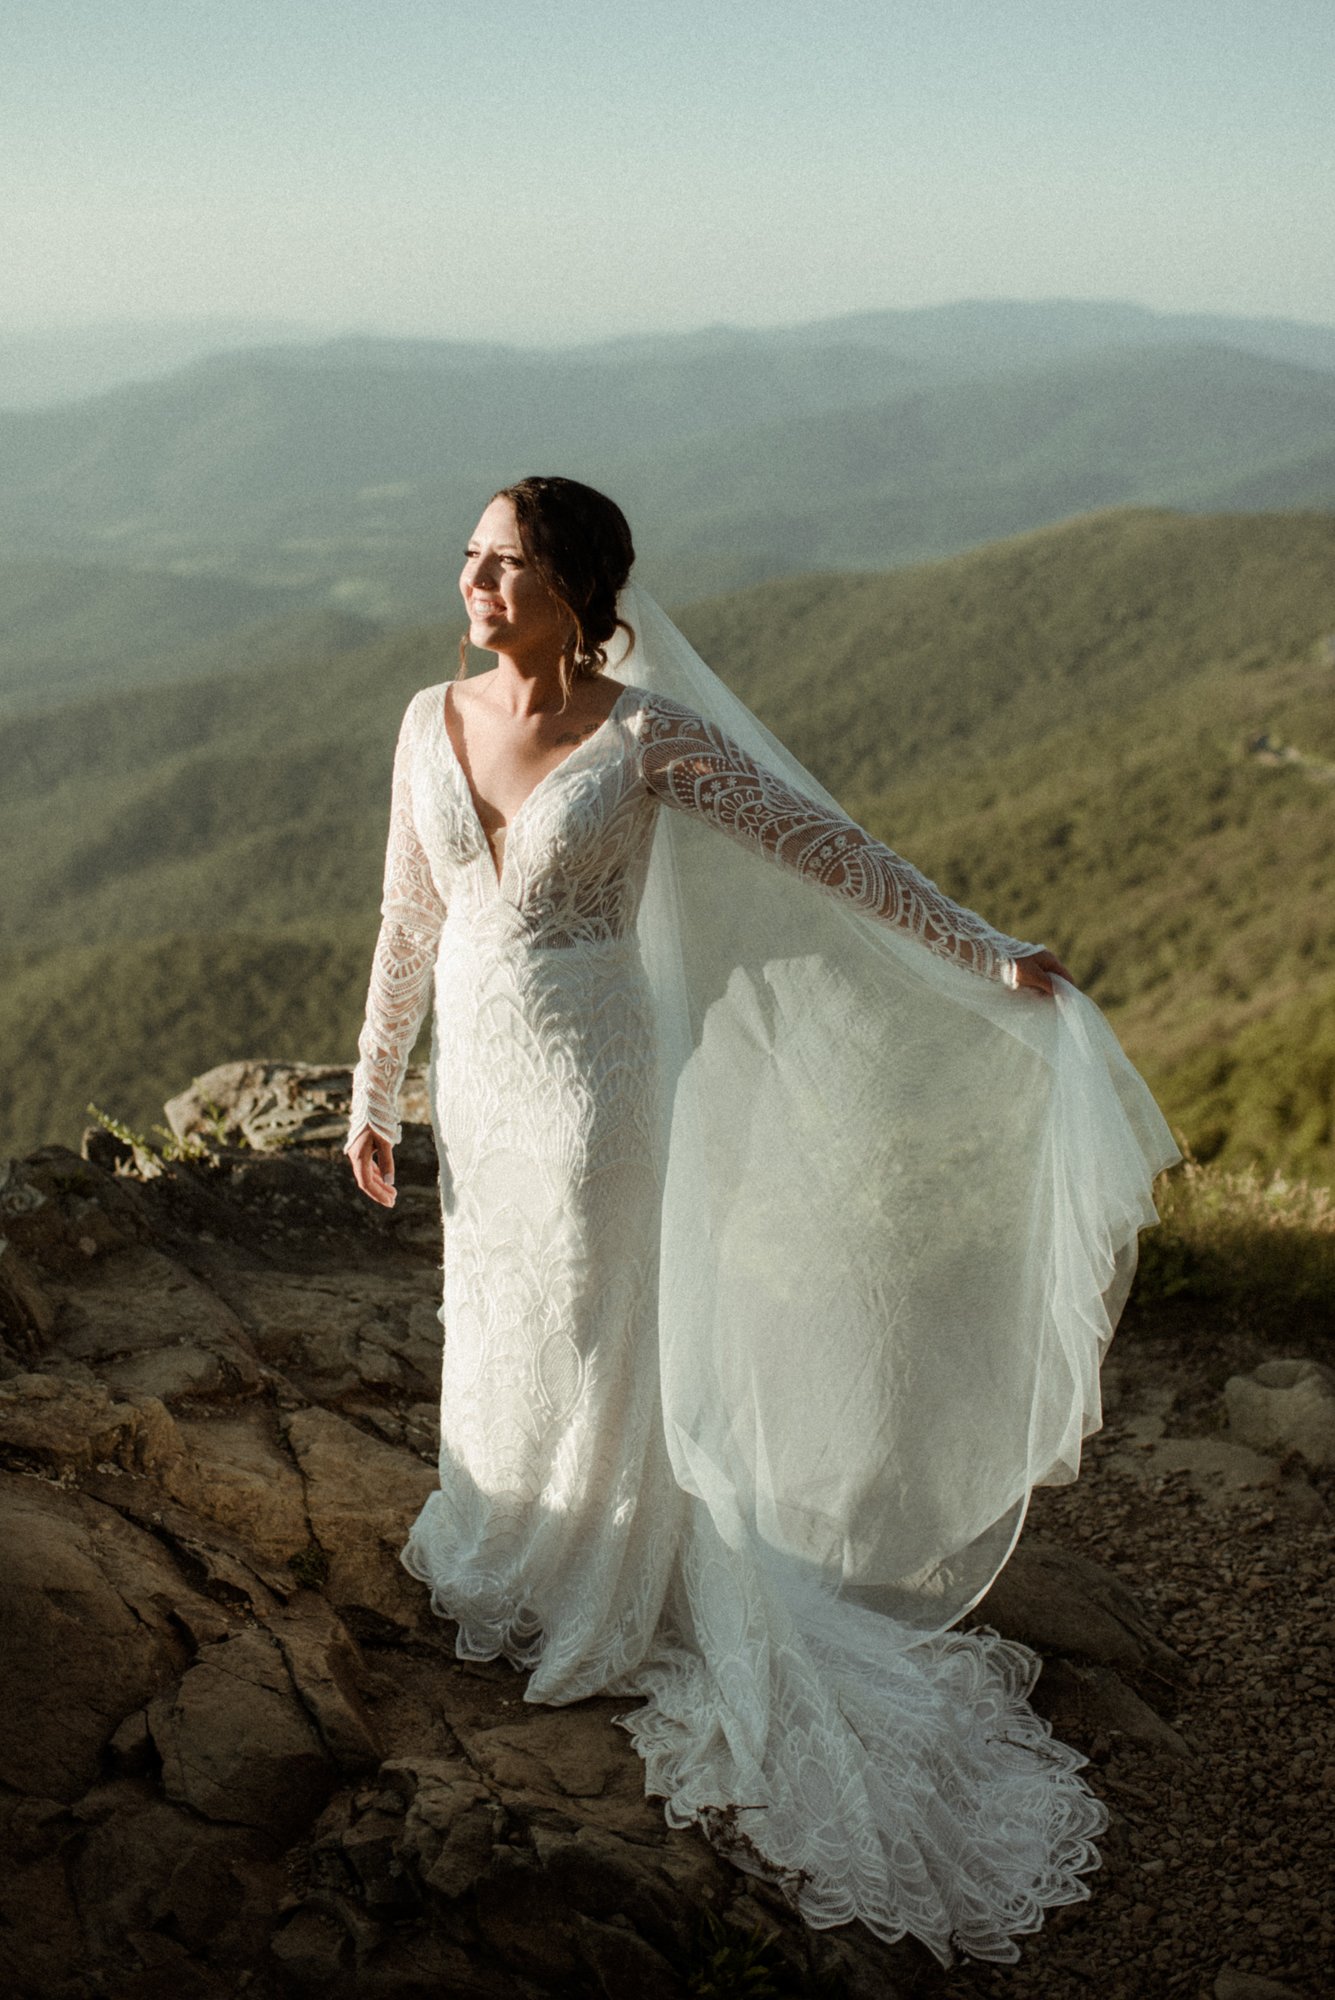 Sunset Elopement on Stony Man Summit in Shenandoah National Park - White Sails Creative Elopement Photography - July Elopement on the Blue Ridge Parkway_43.jpg